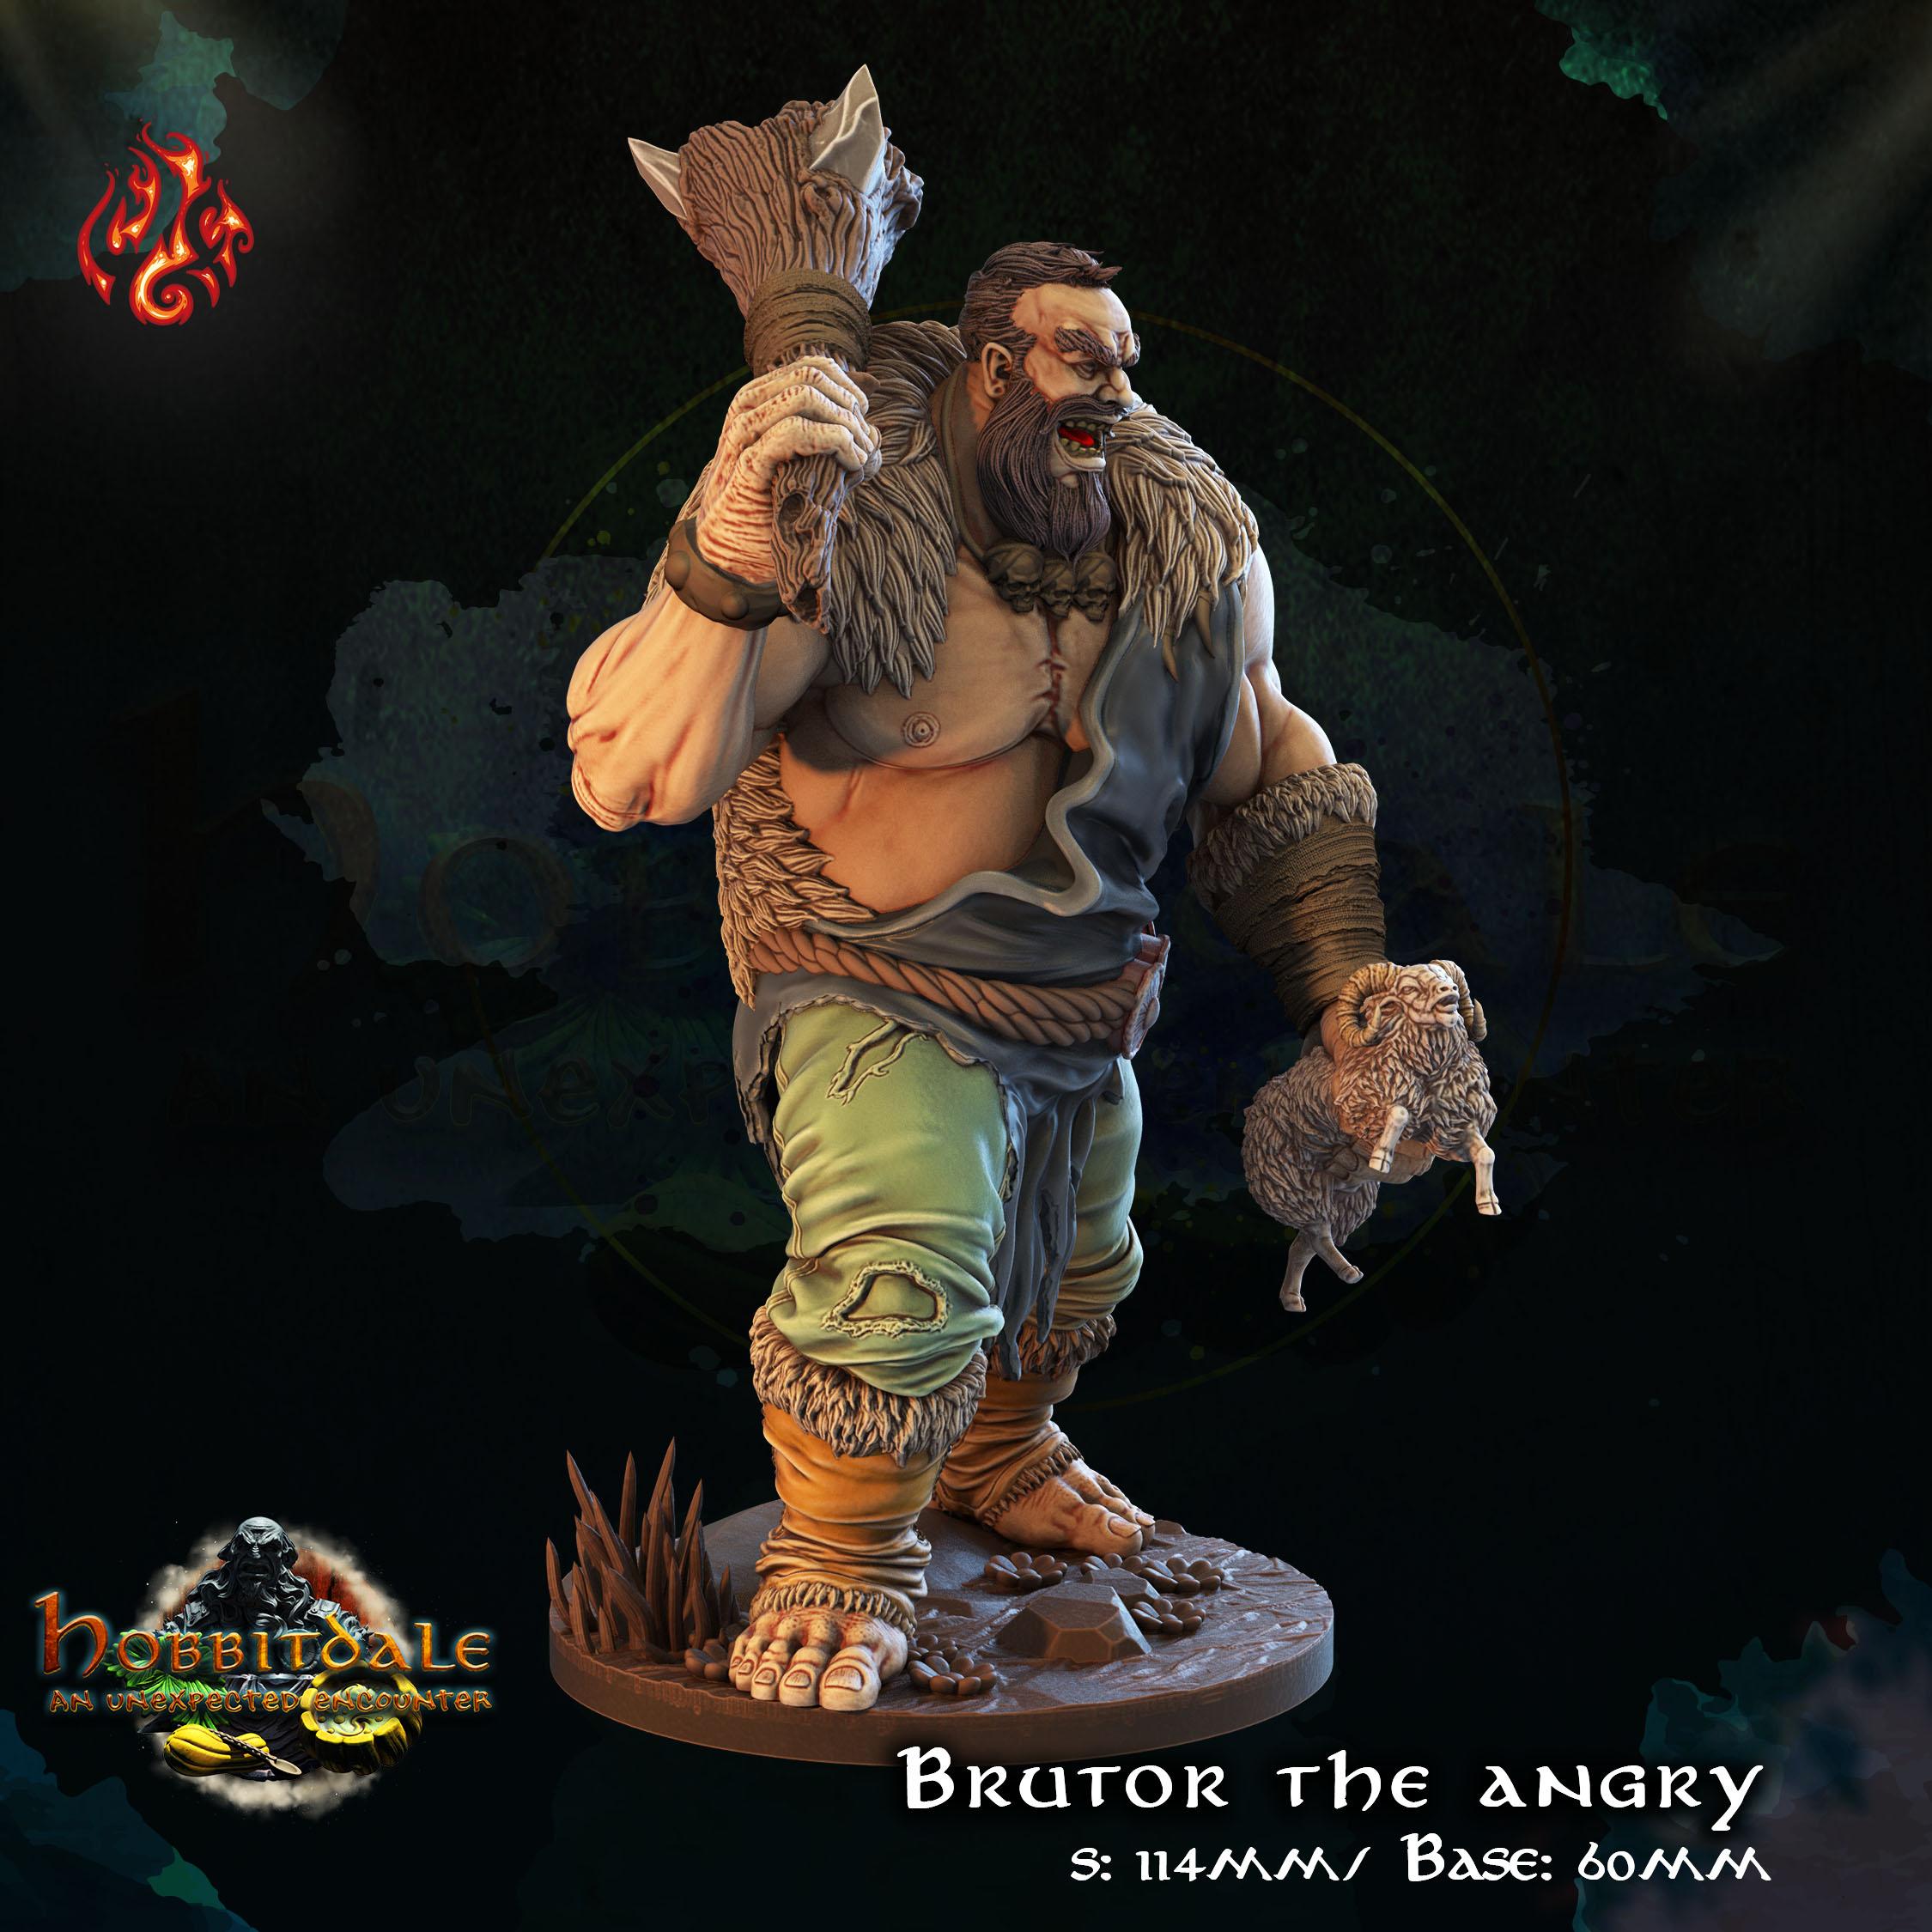 Brutor the Angry 3d model